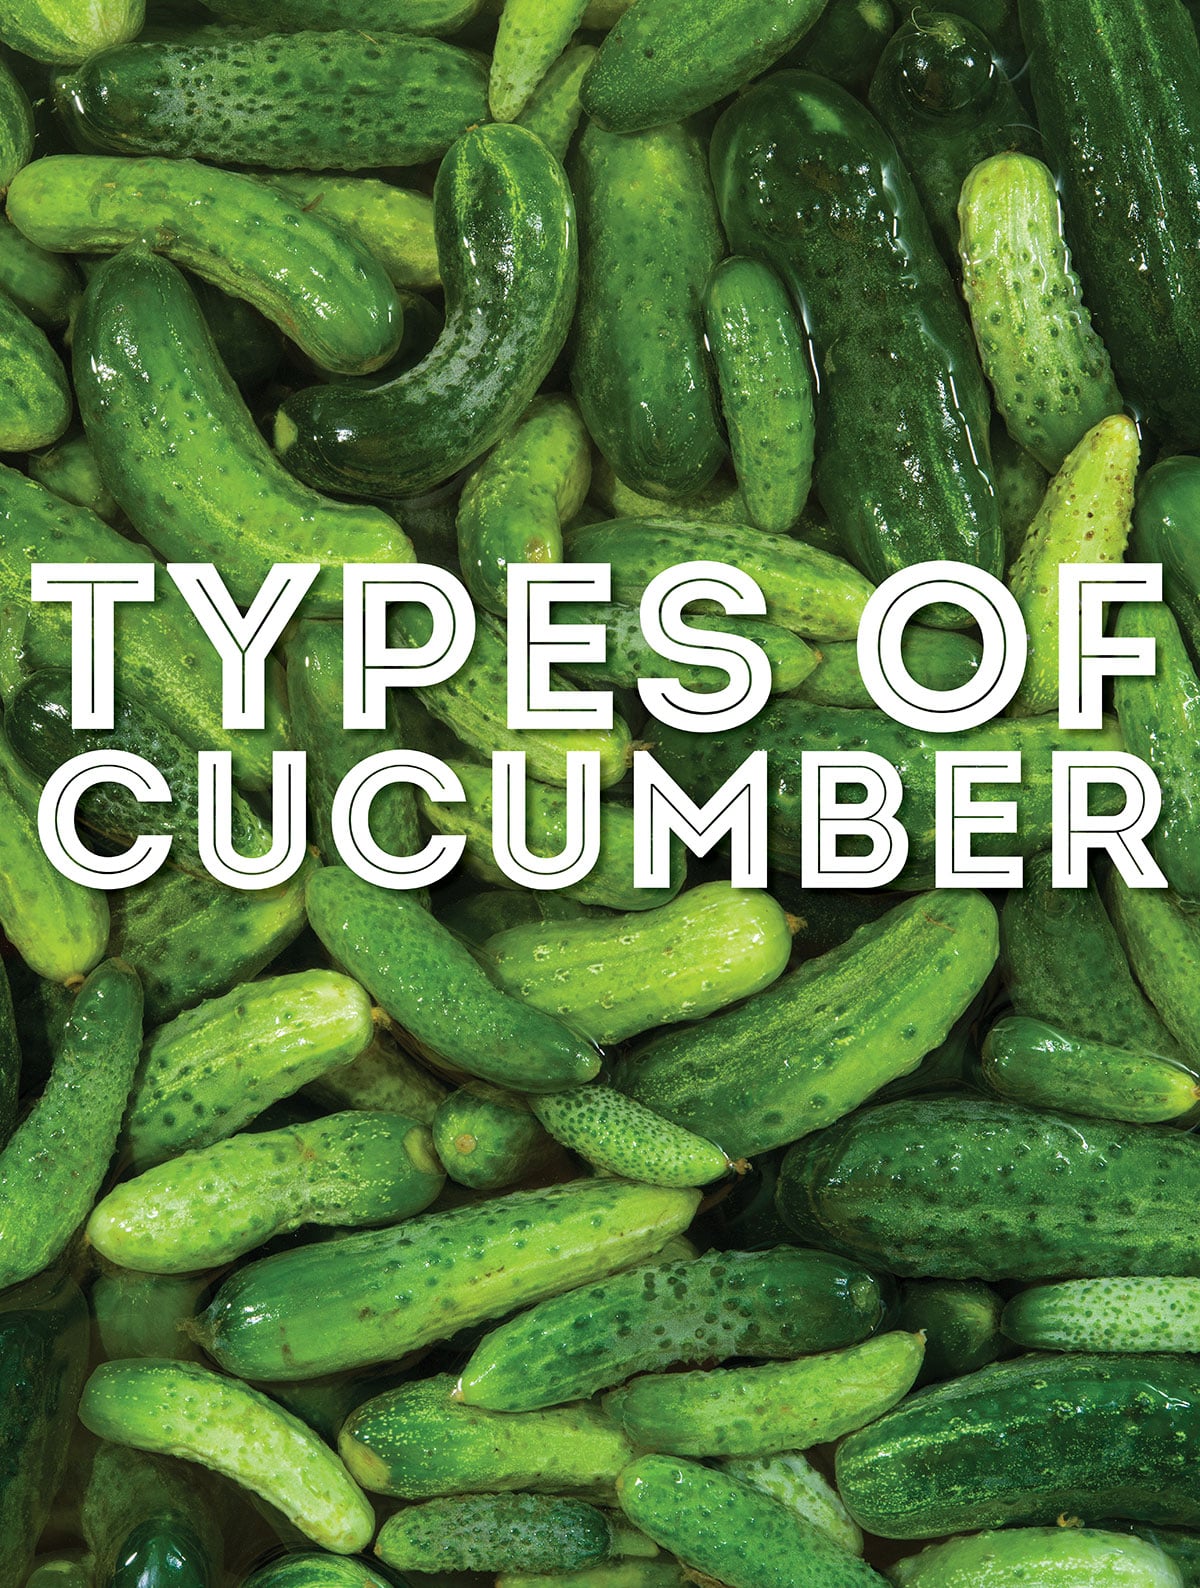 Collage that says "types of cucumber".